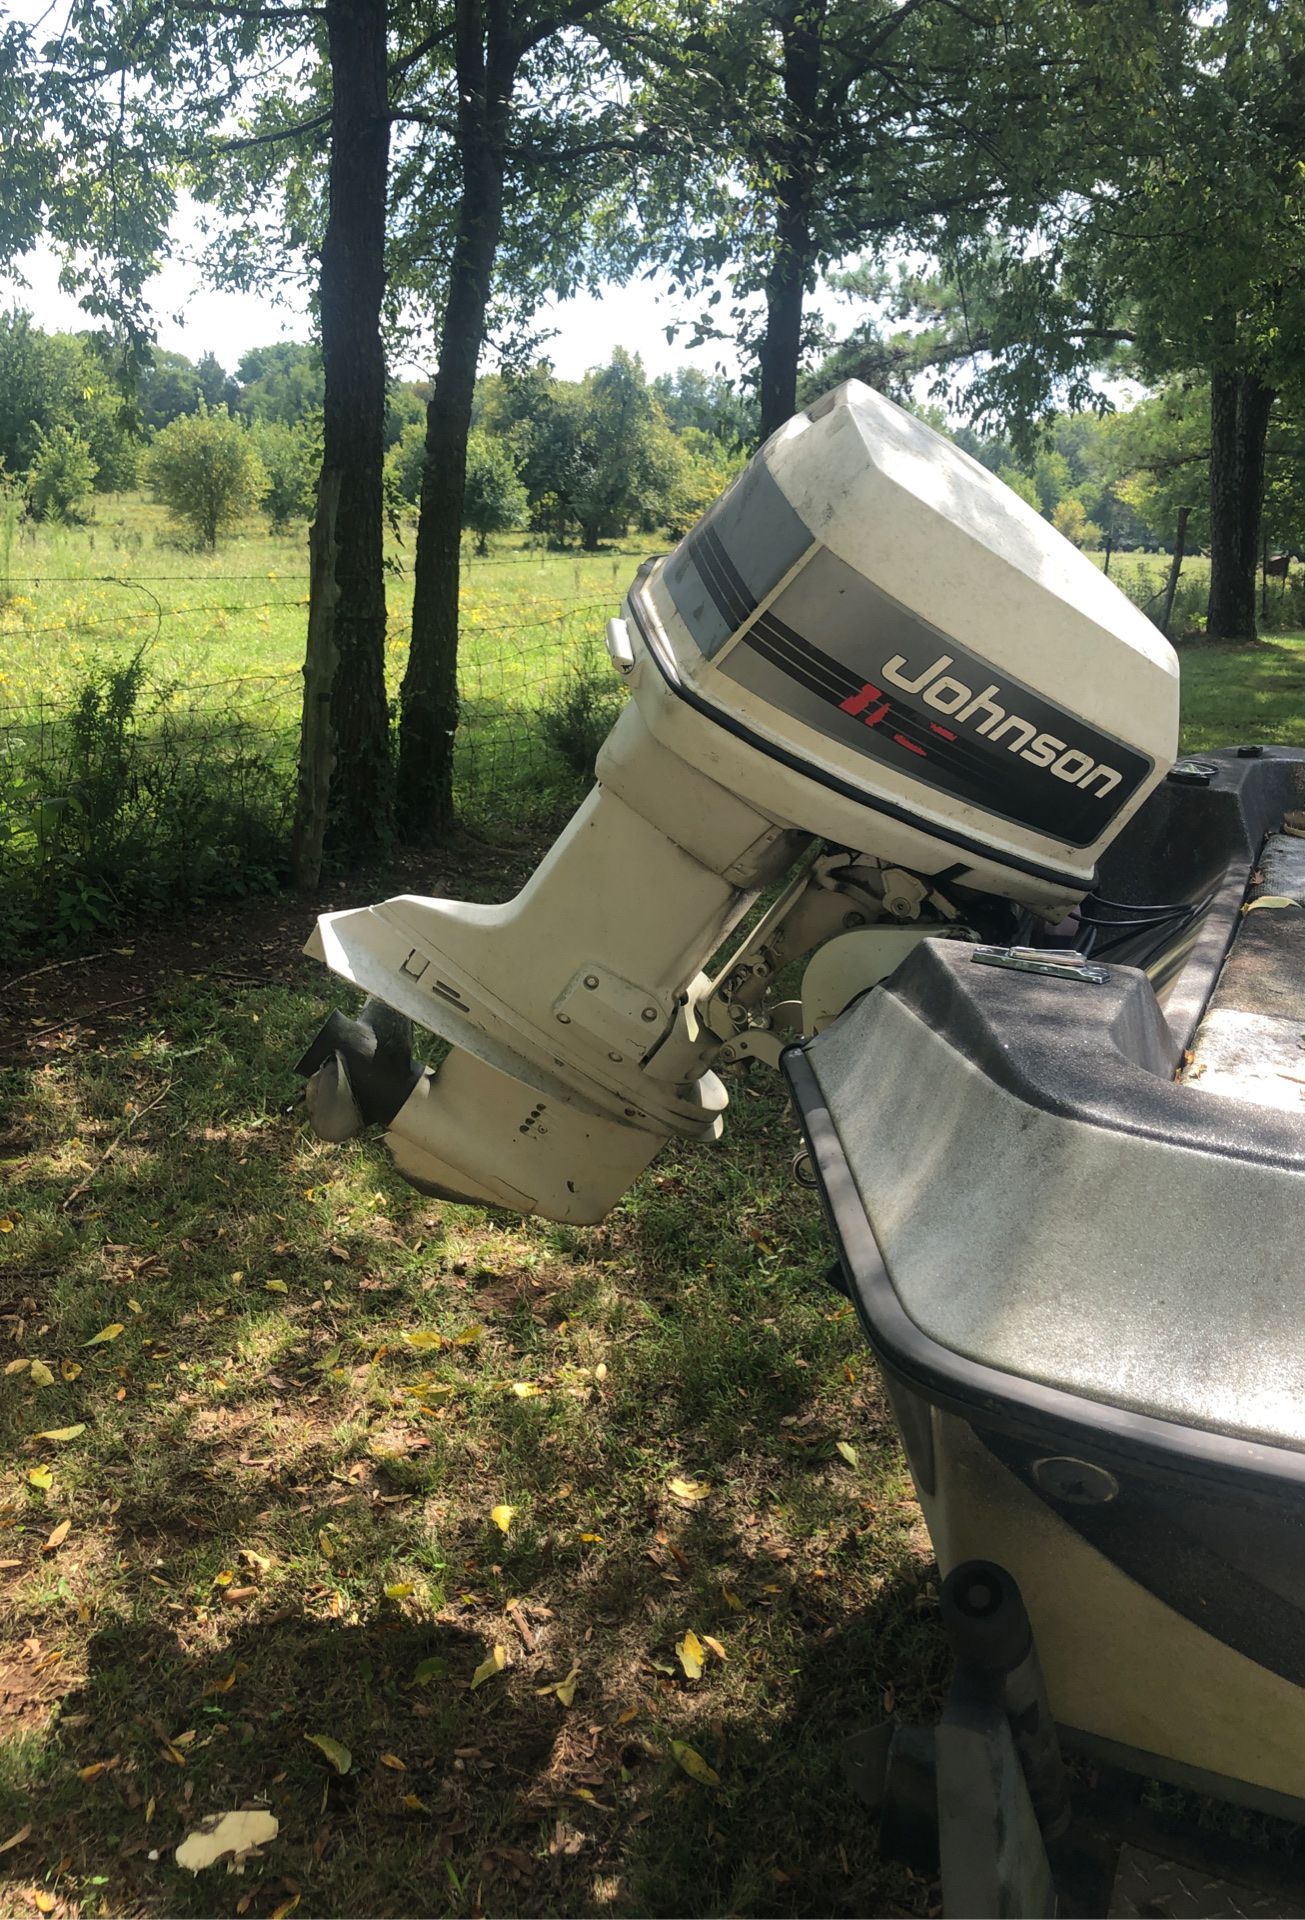 14 ft boat and trailer motor locked